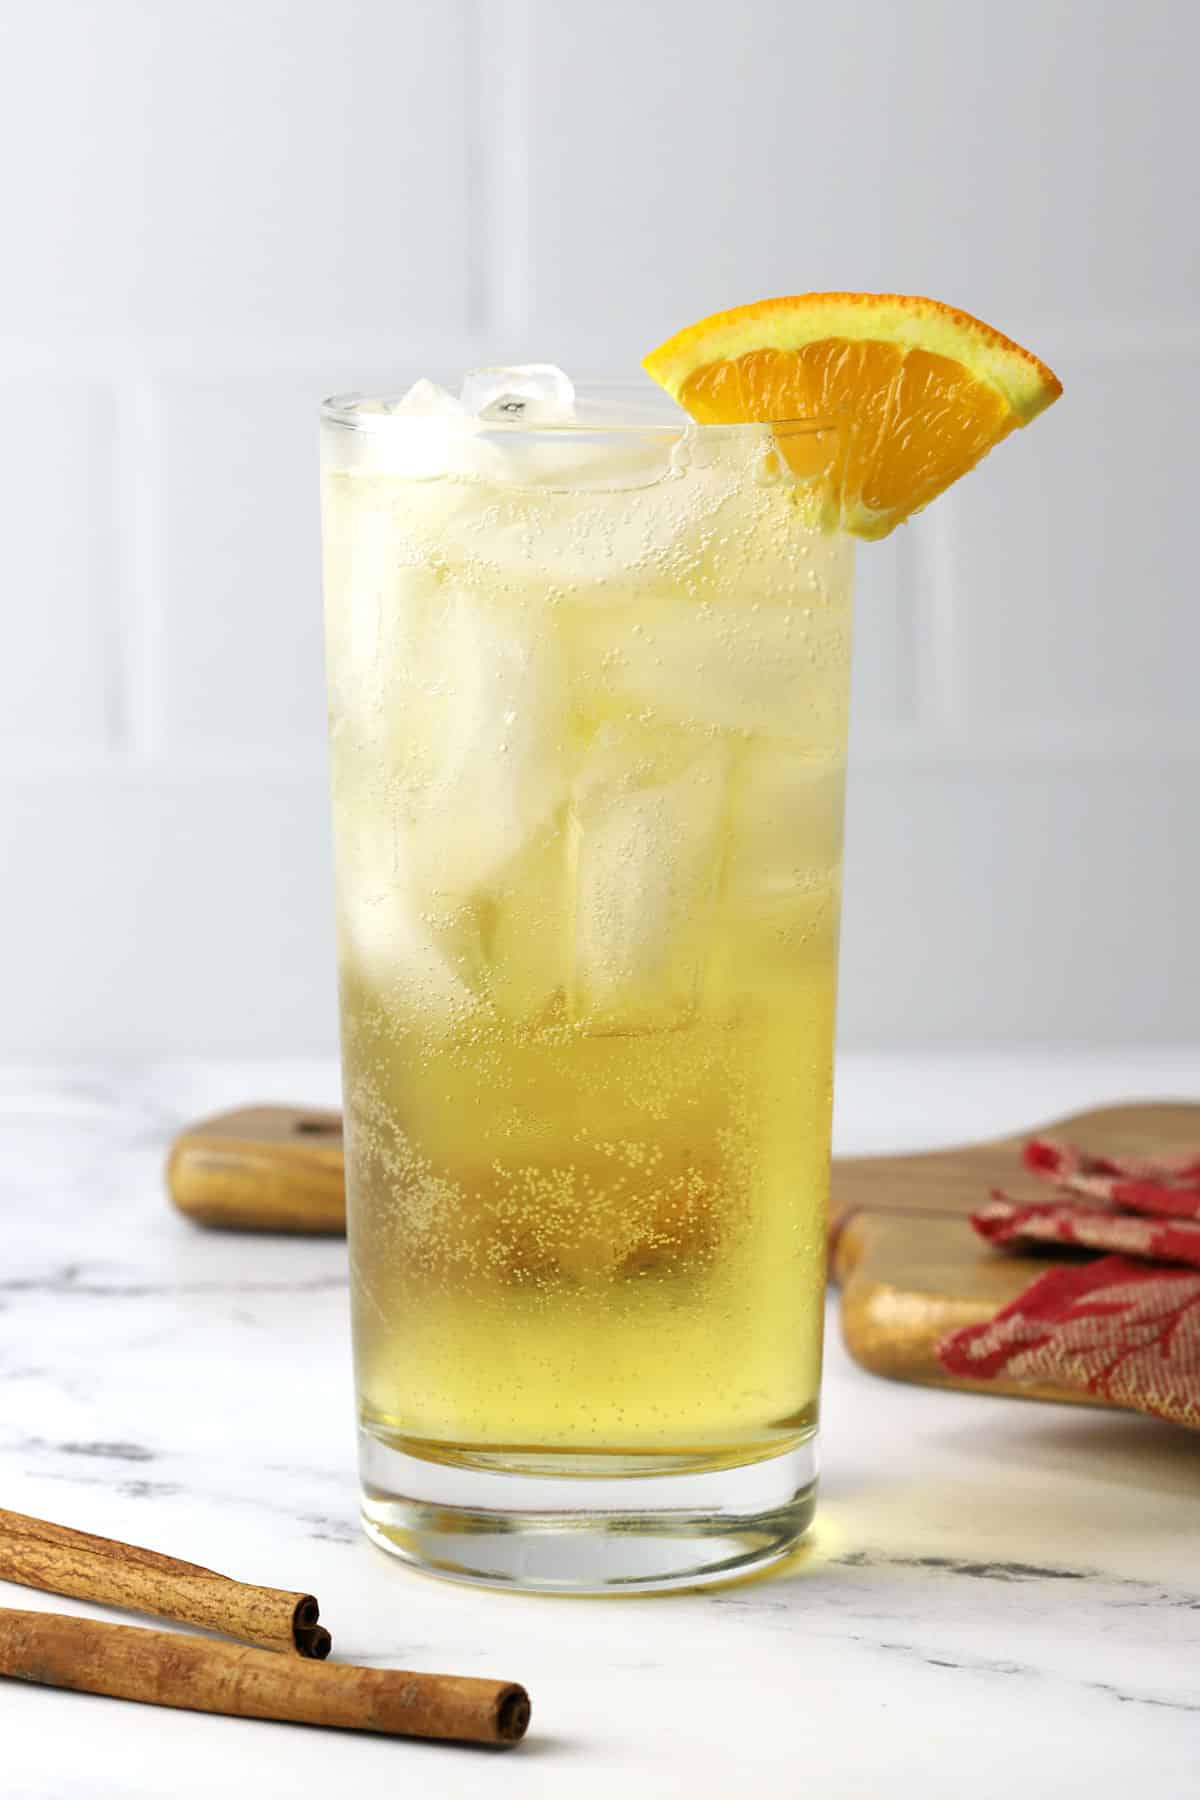 A glass of spiced orange ginger ale cocktail on a countertop, garnished with an orange slice.